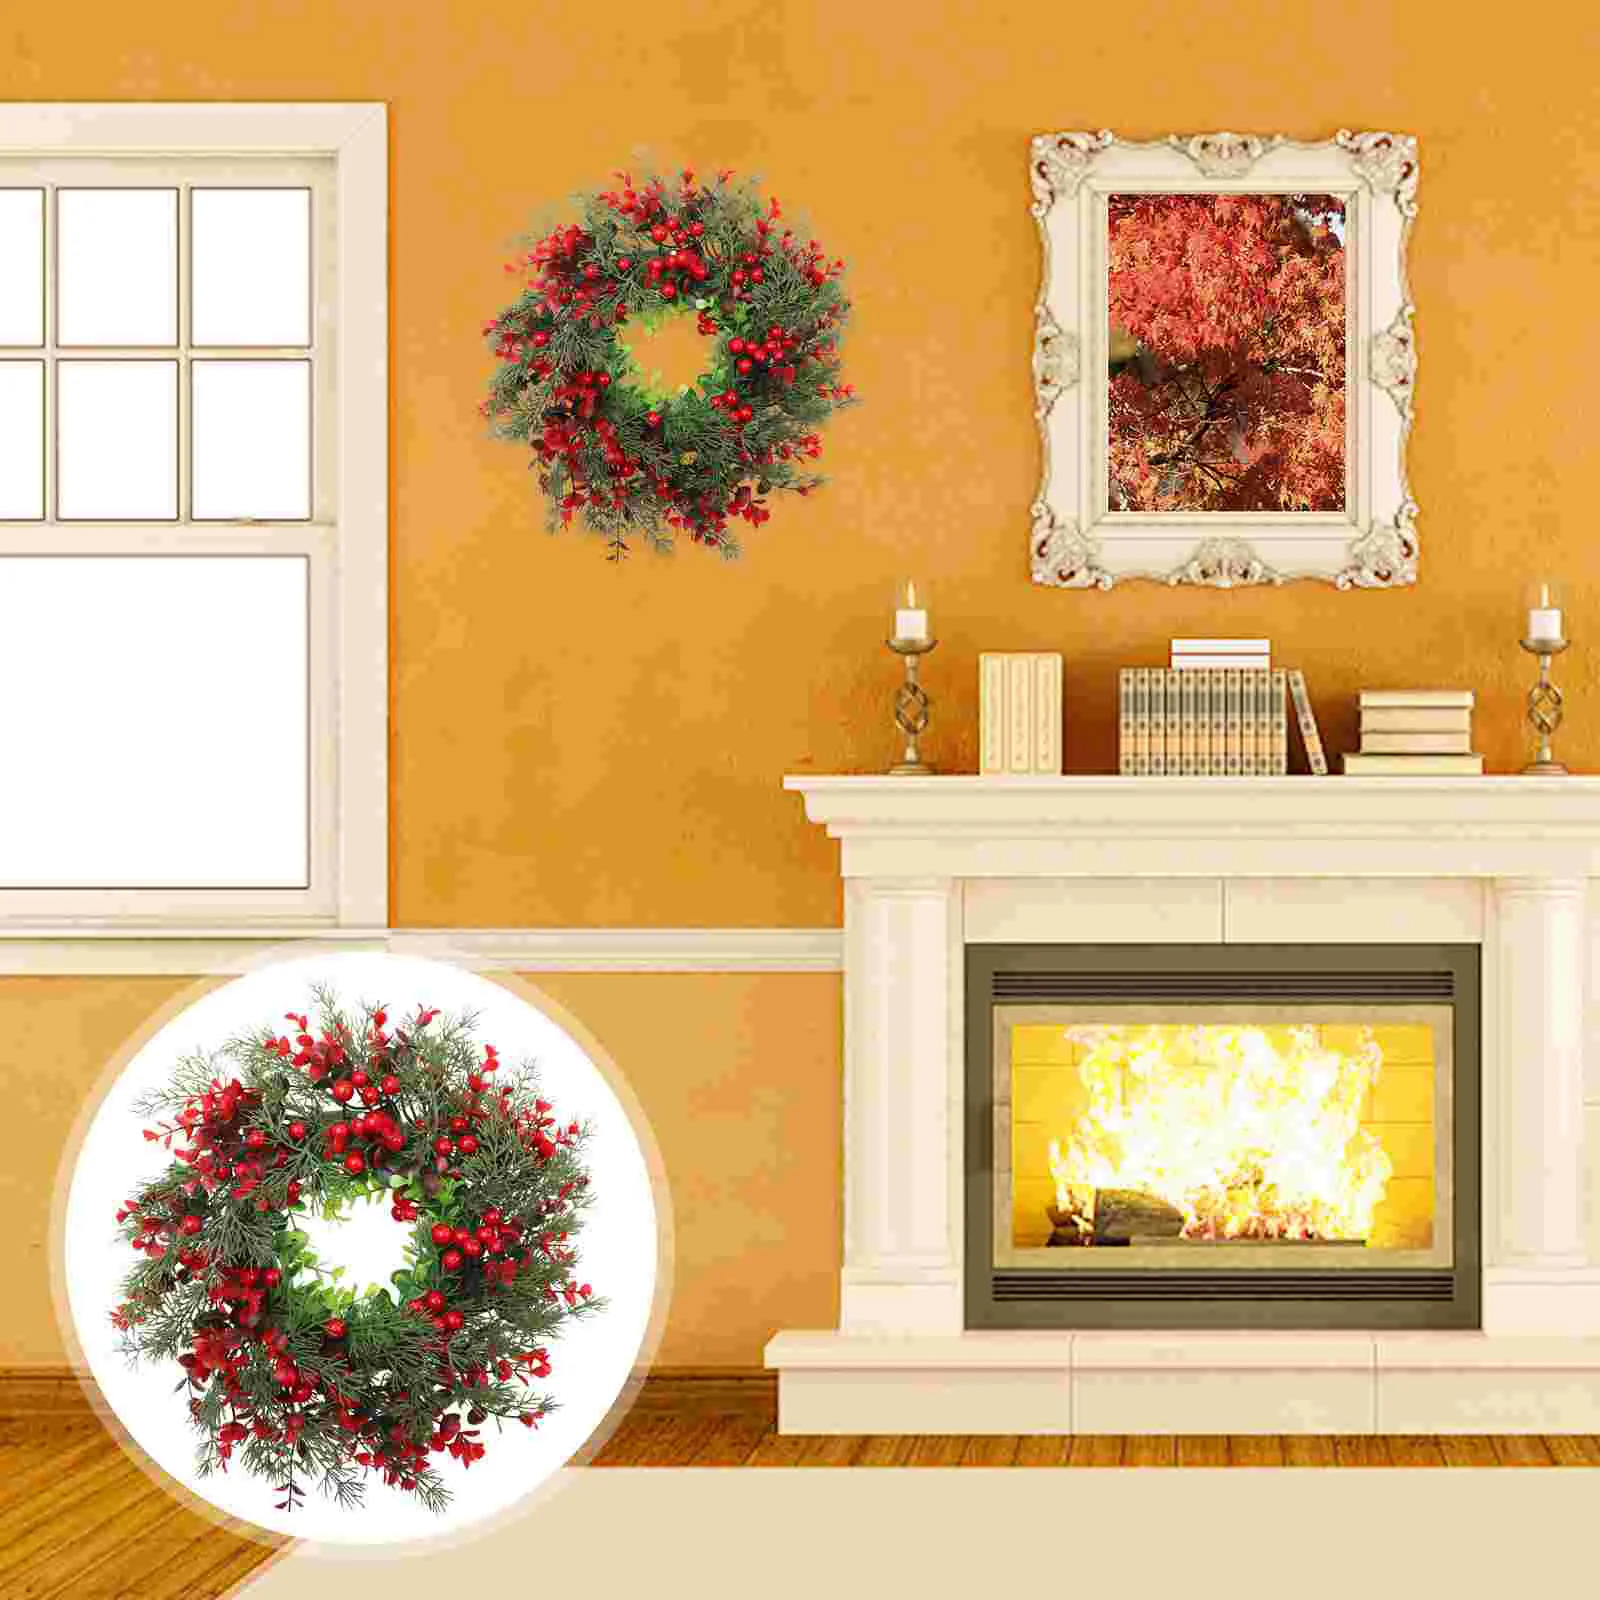 

Artifcial Christmas Red Berry Wreath: Winter Twig Wreath Holiday Front Door Wreath Xmas Pine Wreath for Fireplace Window Wall